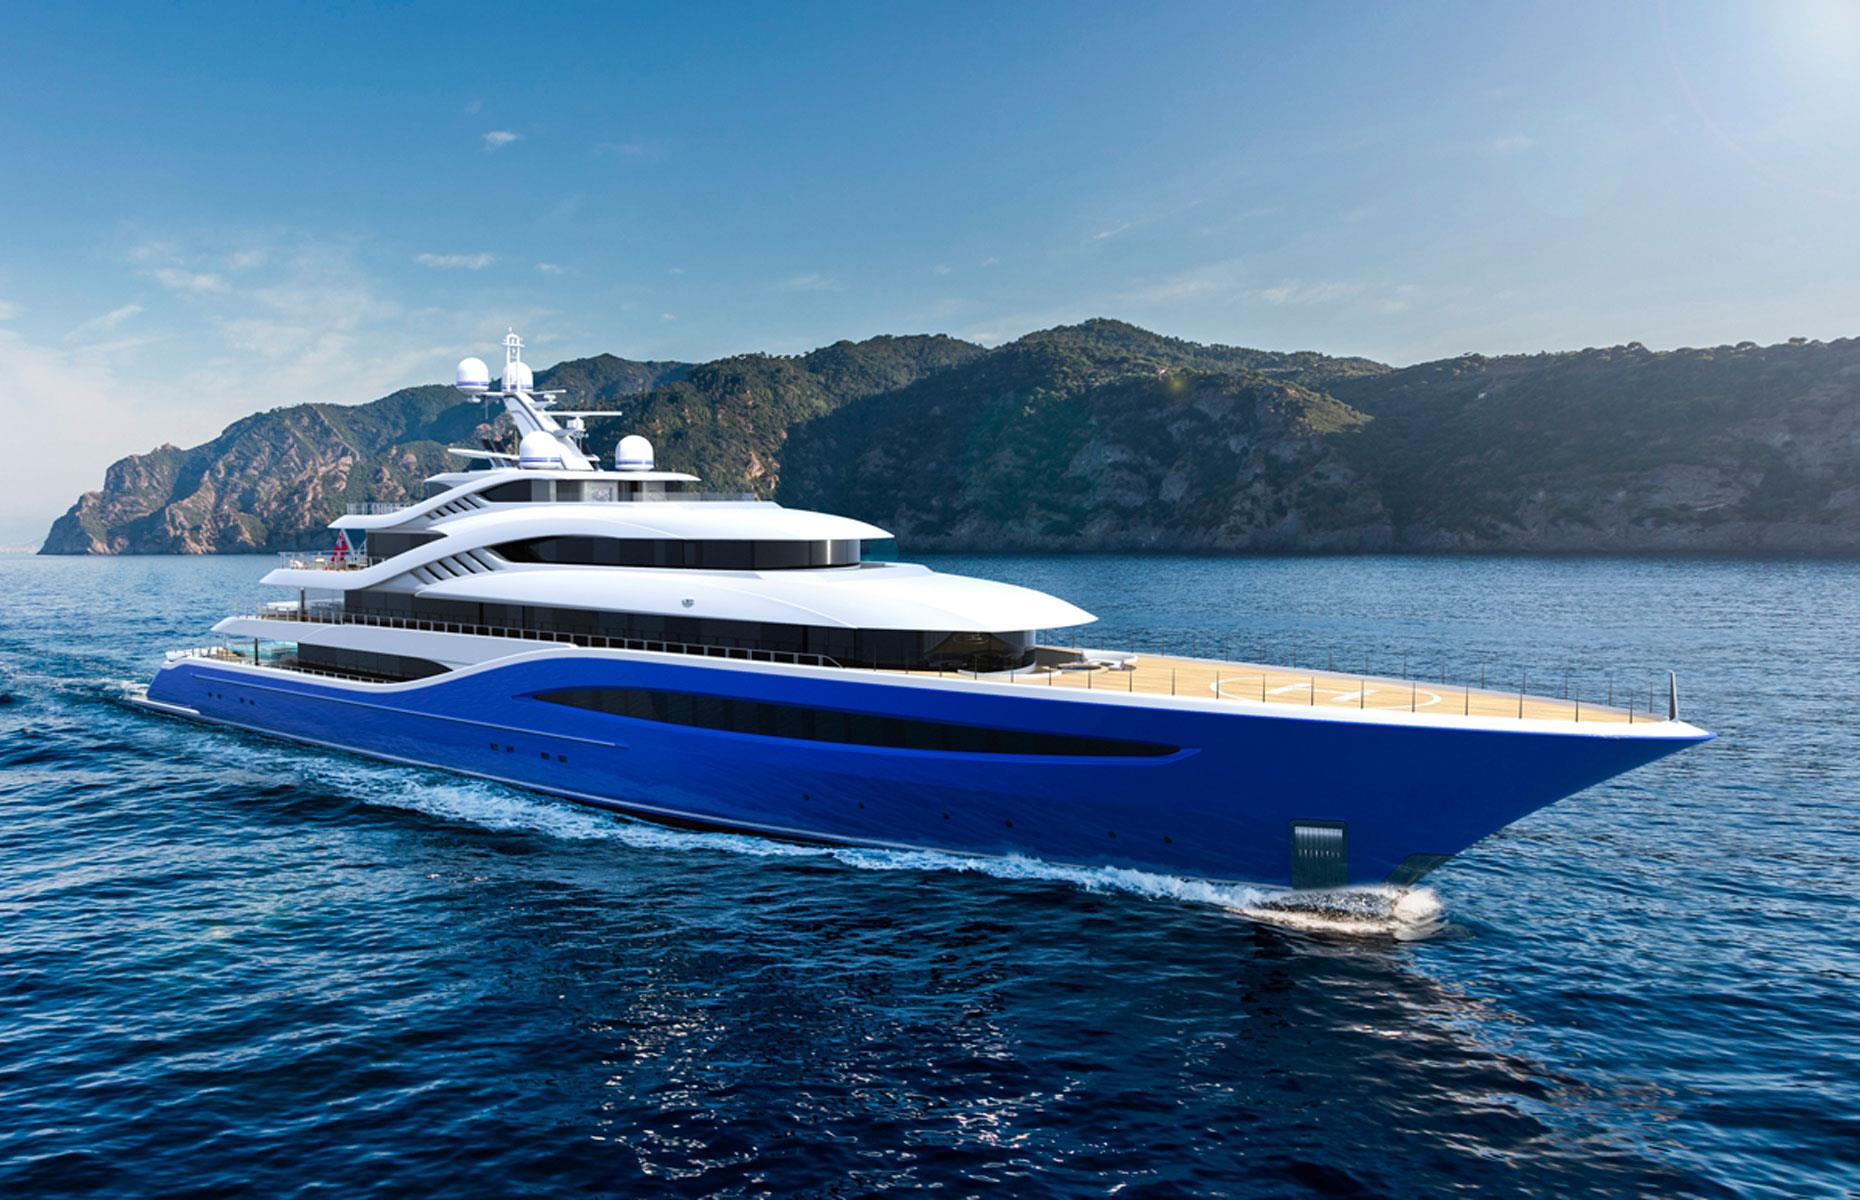 <p>Ready to discover the ultimate in nautical eye candy?</p>  <p>With the largest-ever superyacht poised to grace the high seas – and several other spectacular launches on the horizon – 2024 is tipped to be a truly unforgettable year for fans of floating palaces.</p>  <p><strong>Click or scroll through to jump aboard the most hotly anticipated superyachts scheduled for delivery this year, from state-of-the-art explorers to a record-breaking model that's expected to cost a staggering $600 million. </strong></p>  <p>All dollar amounts in US dollars.</p>